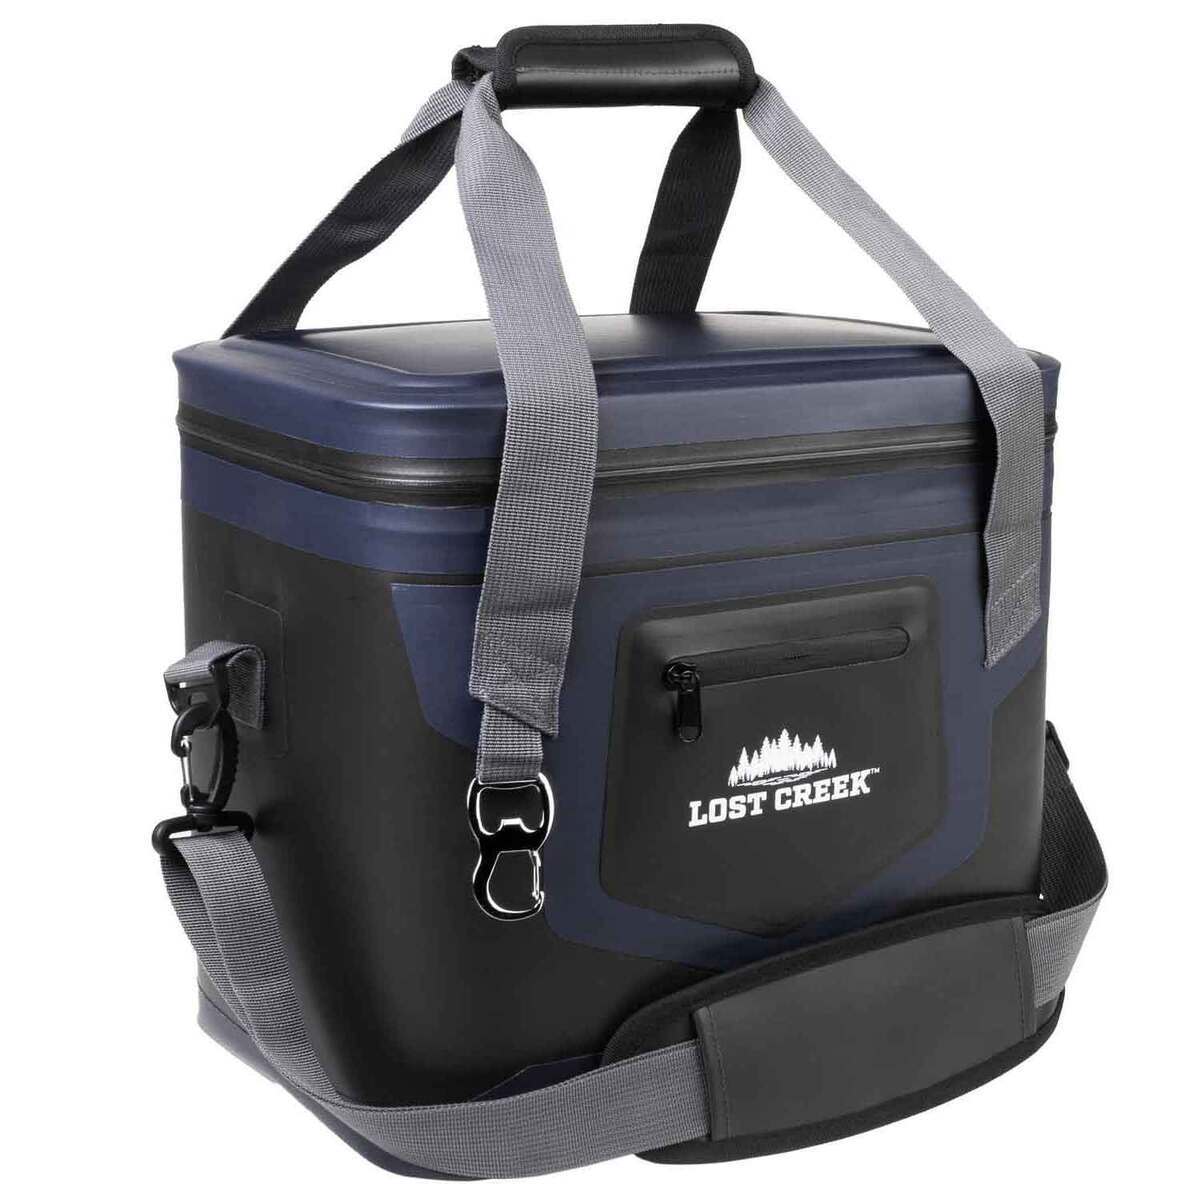 30 Liter Inflatable Soft Cooler Dry Bag - 100% Waterproof- Keep Your Food & Drinks Cool | Overboard